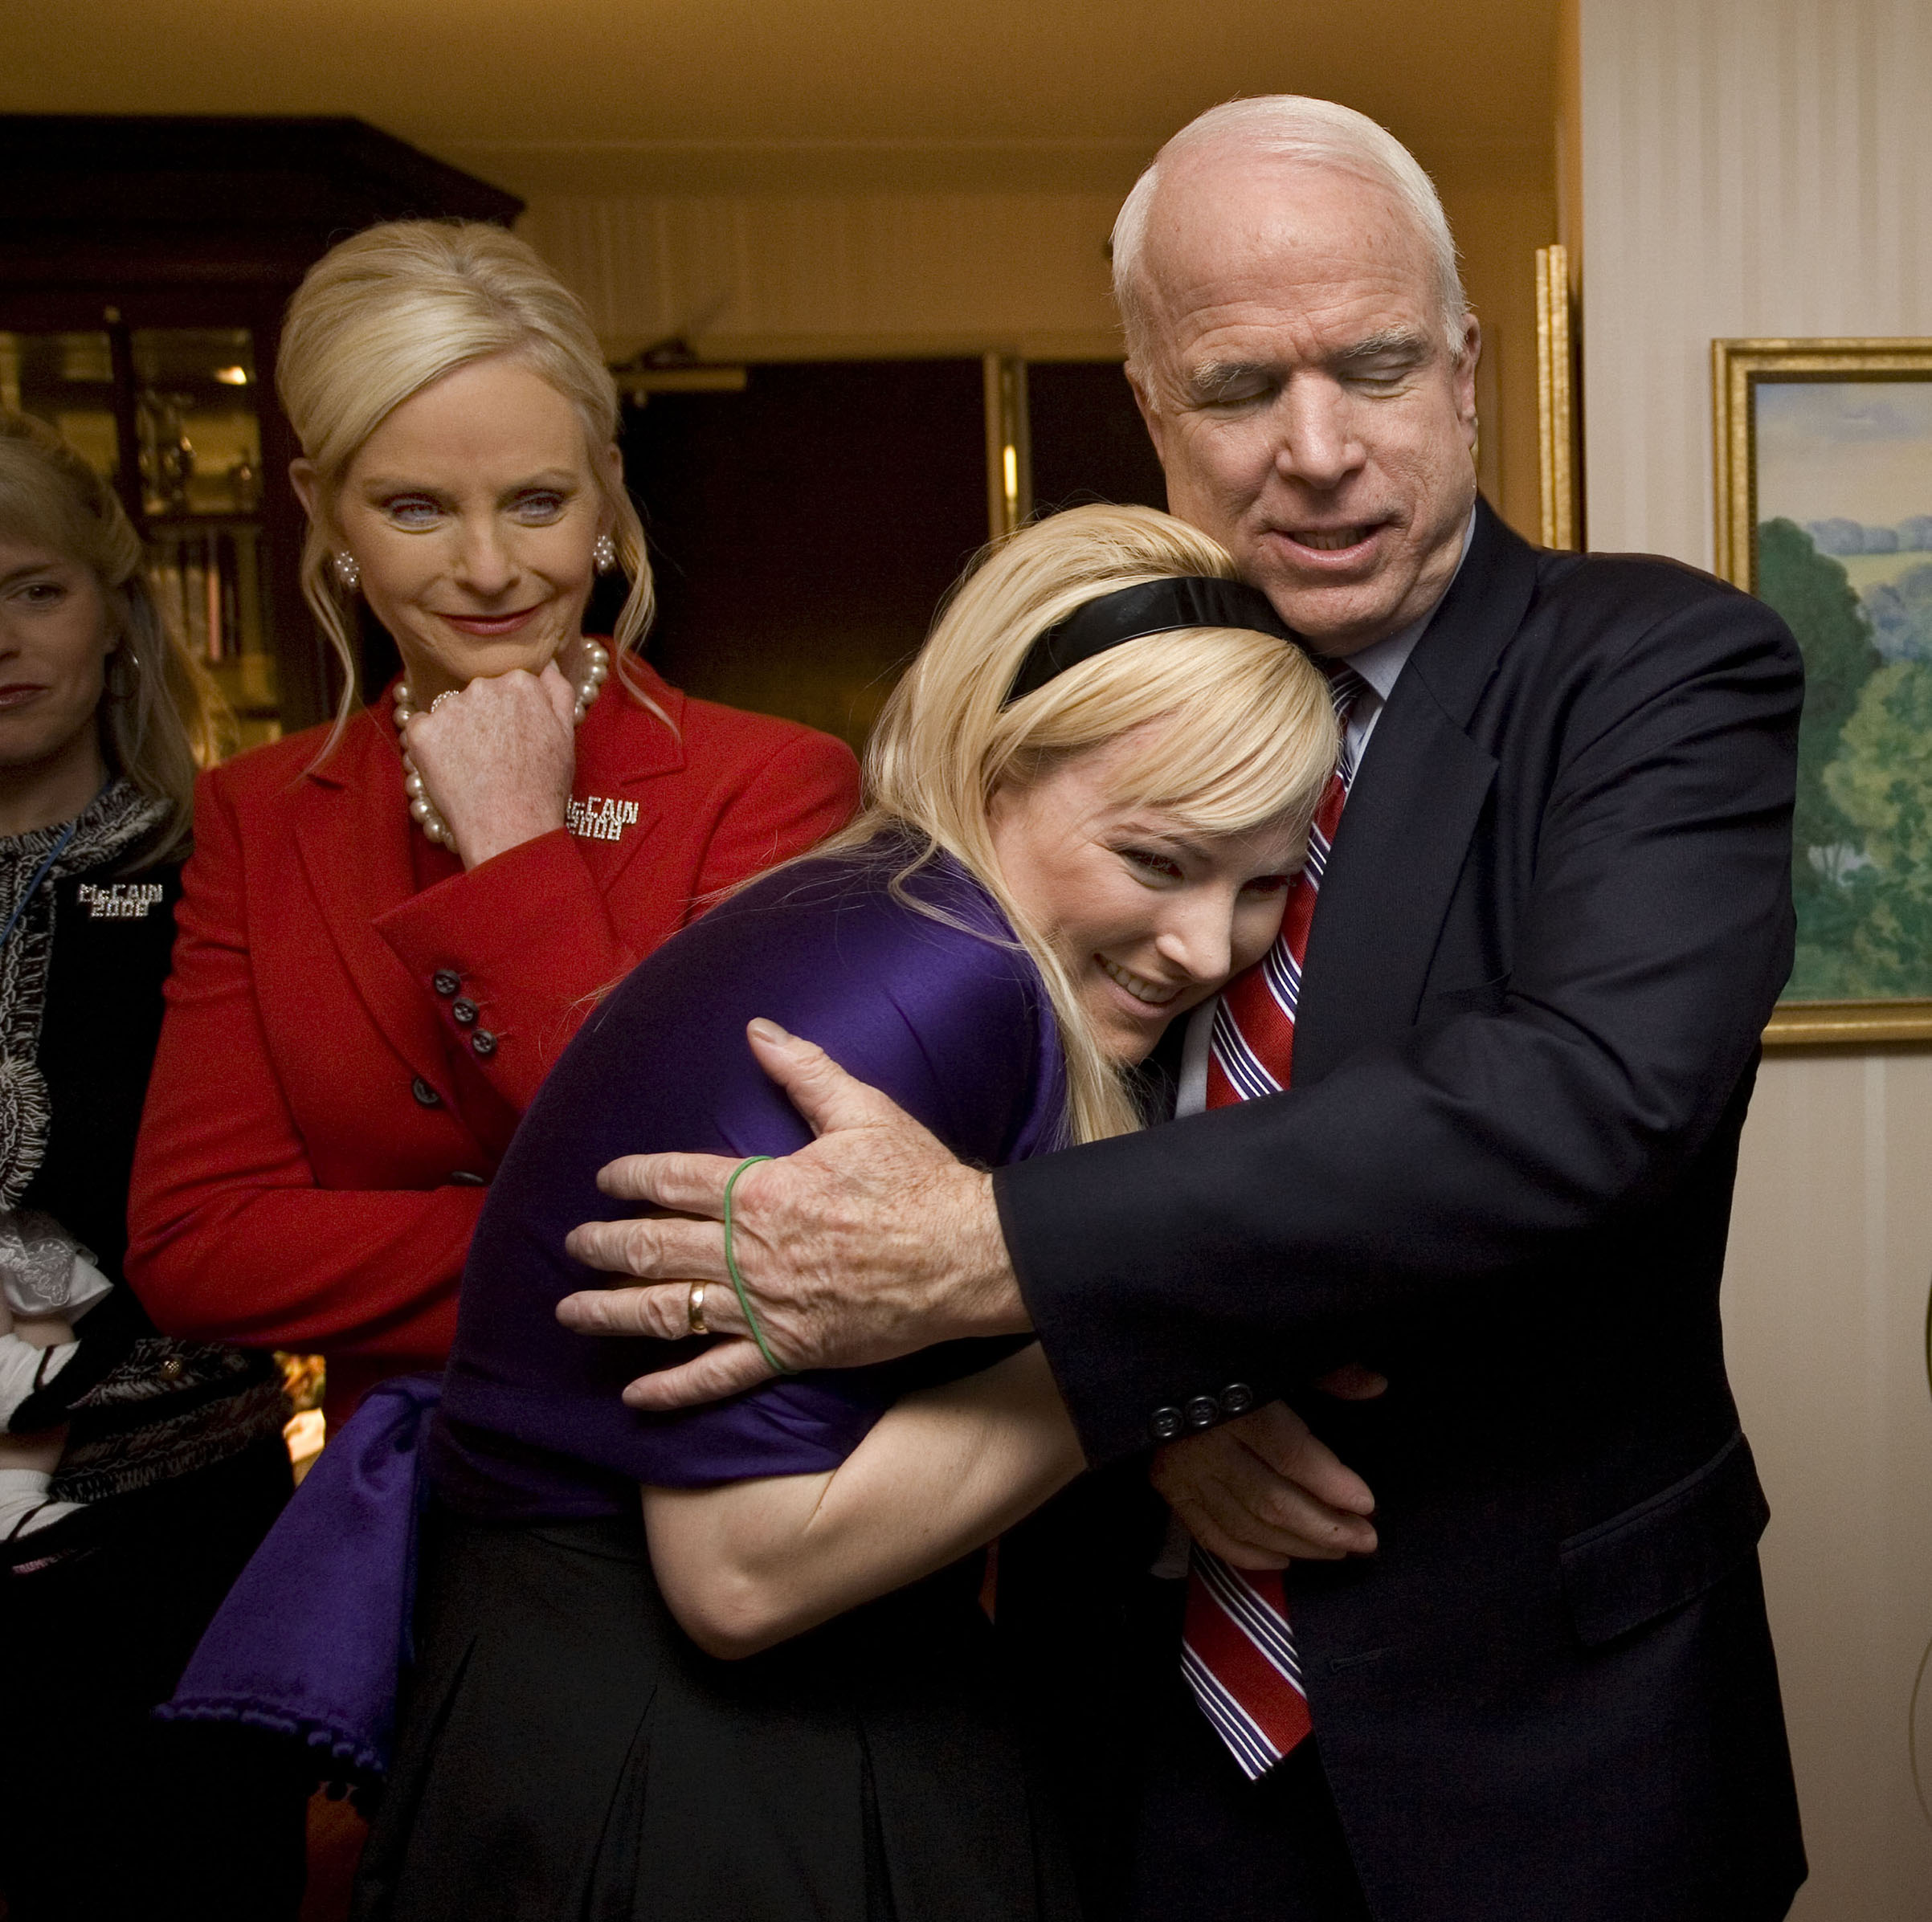 In his suite at the Crown Plaza Hotel, Republican Presidential contender Senator John McCain hugs his daughter Meghan McCain, with his wife Cindy McCain behind them, on Jan. 8, 2008 in Nashua, N.H. (David Hume Kennerly—Getty Images)